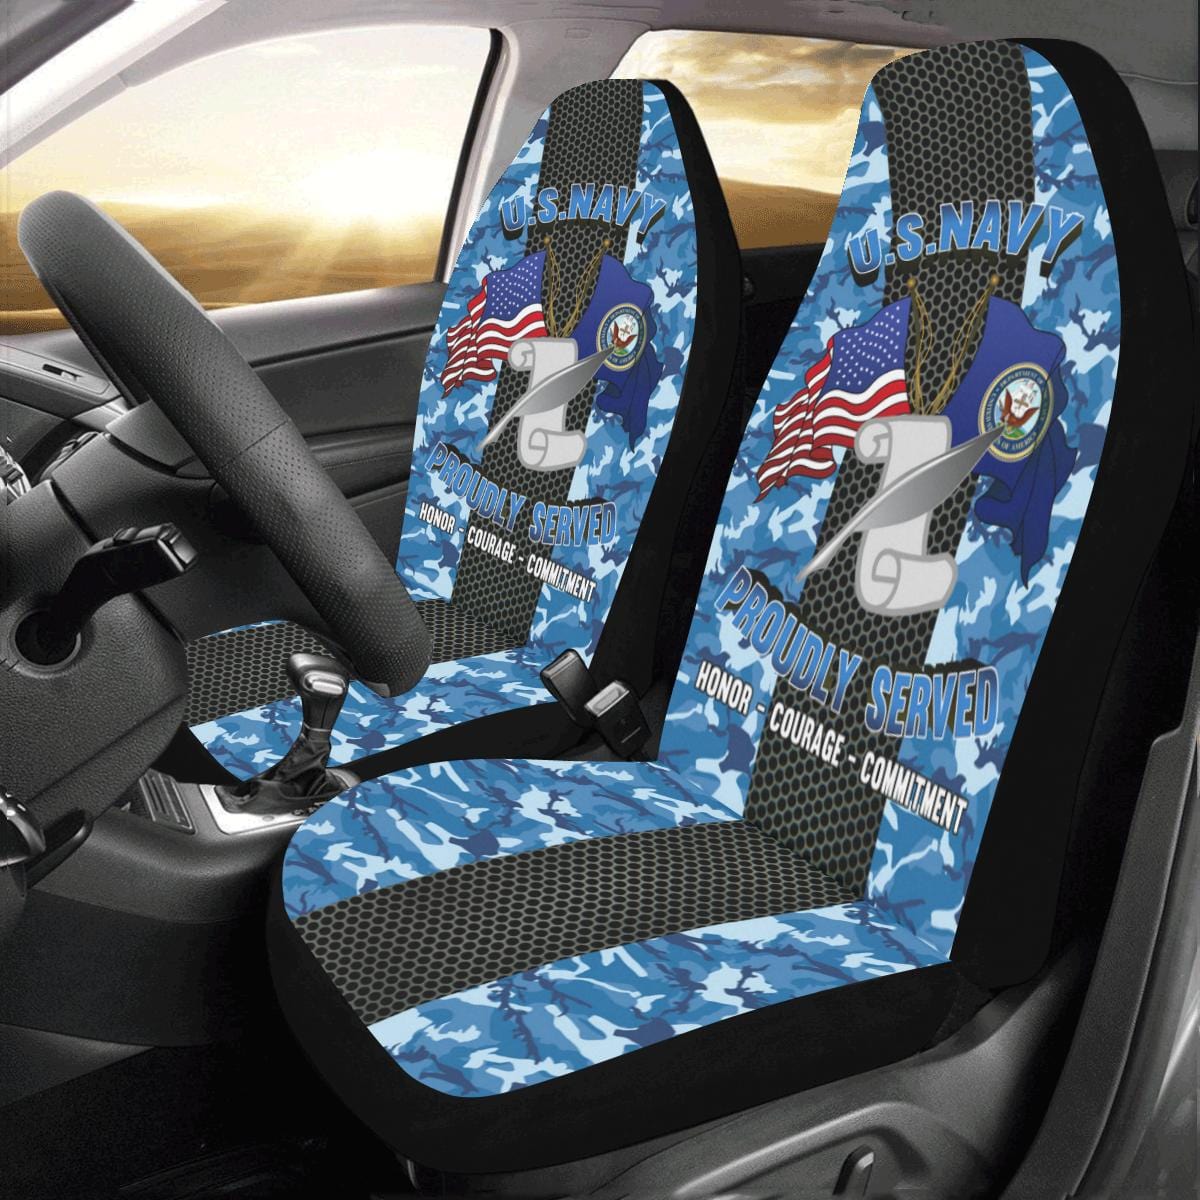 Navy Journalist Navy JO Car Seat Covers (Set of 2)-SeatCovers-Navy-Rate-Veterans Nation